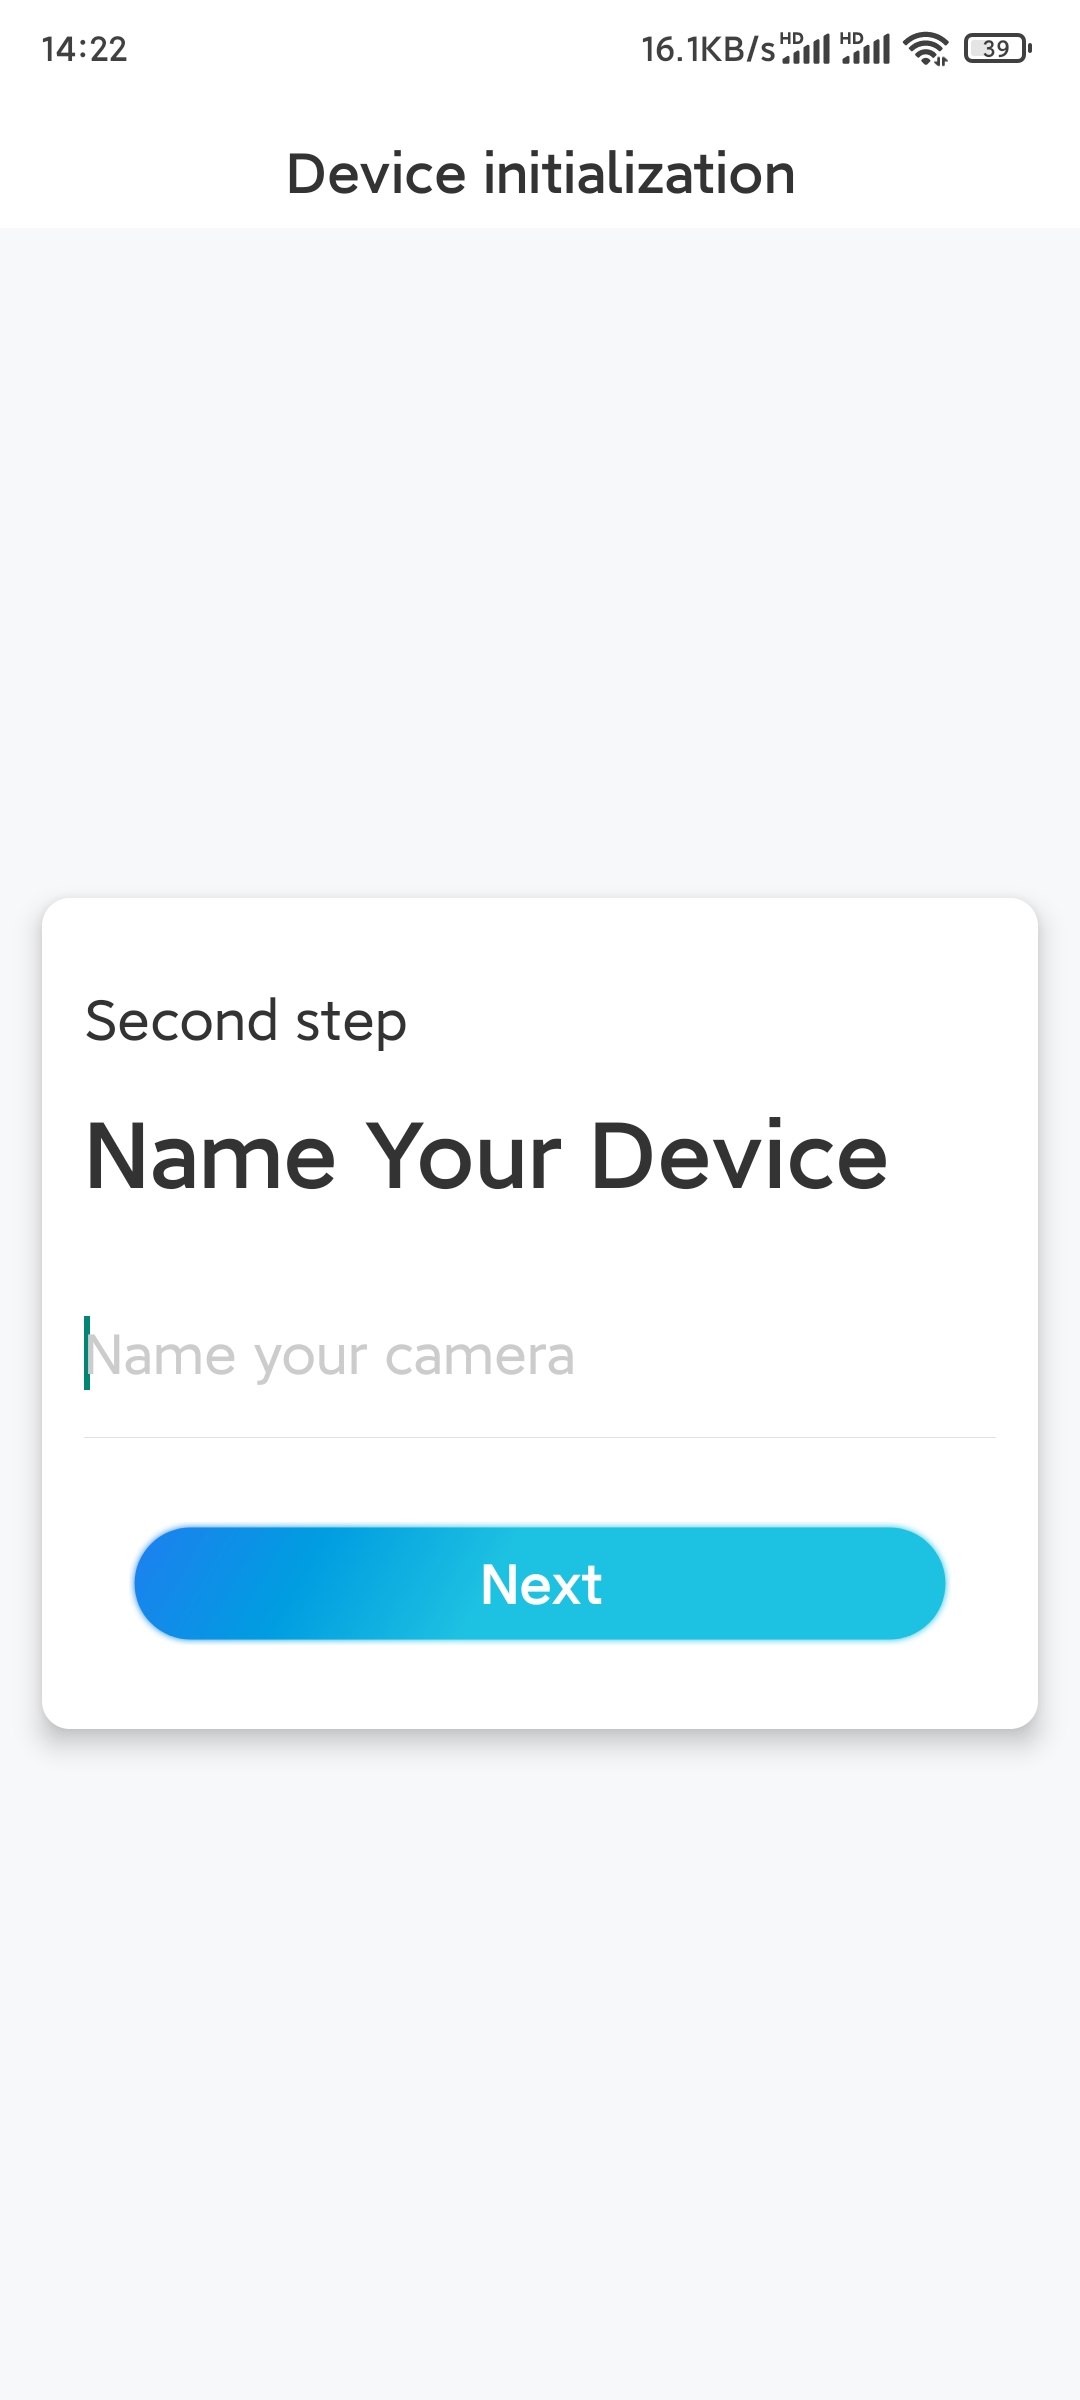 5._Name_your_camera.jpg